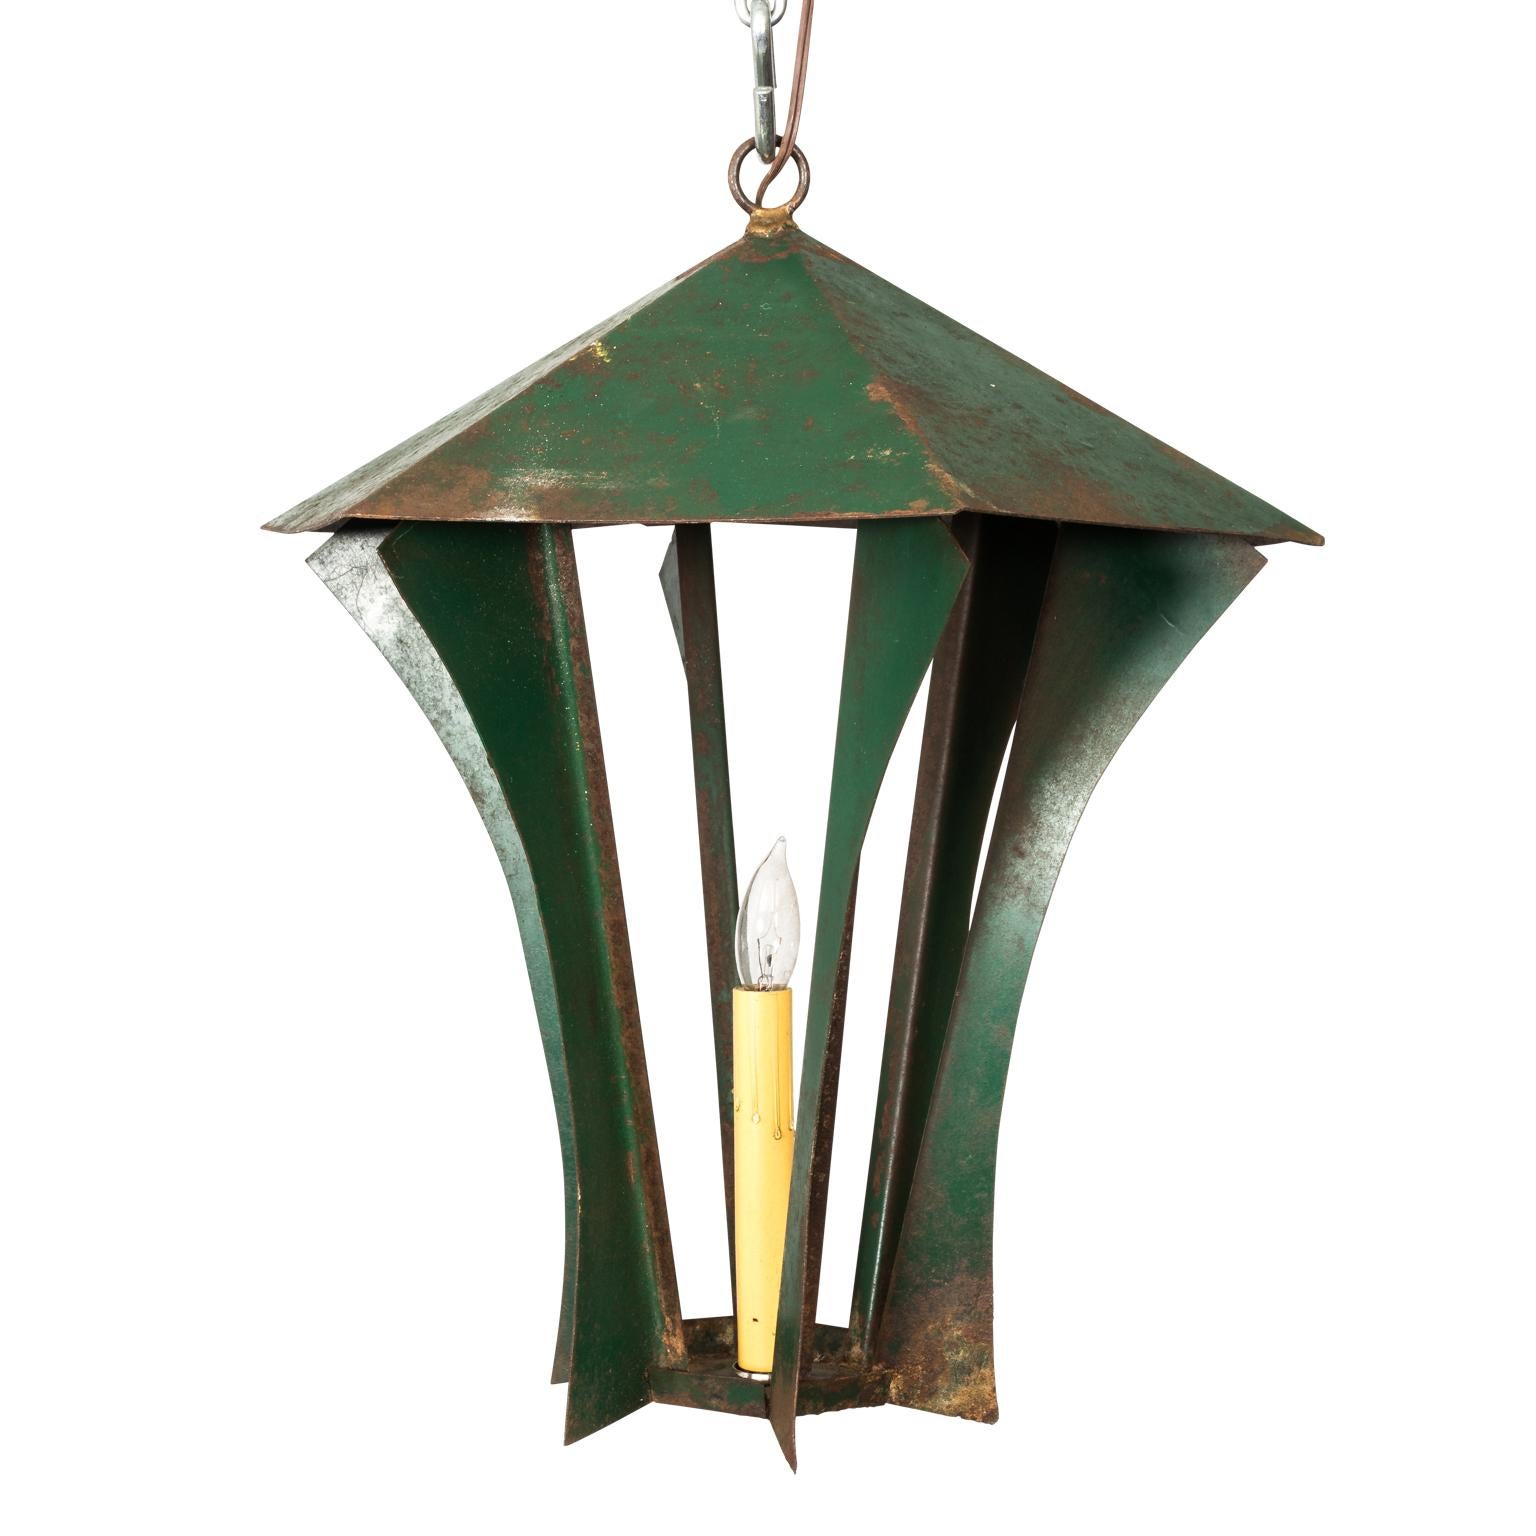 Pair of green painted steel lanterns with minor surface rustication, circa 1940s.